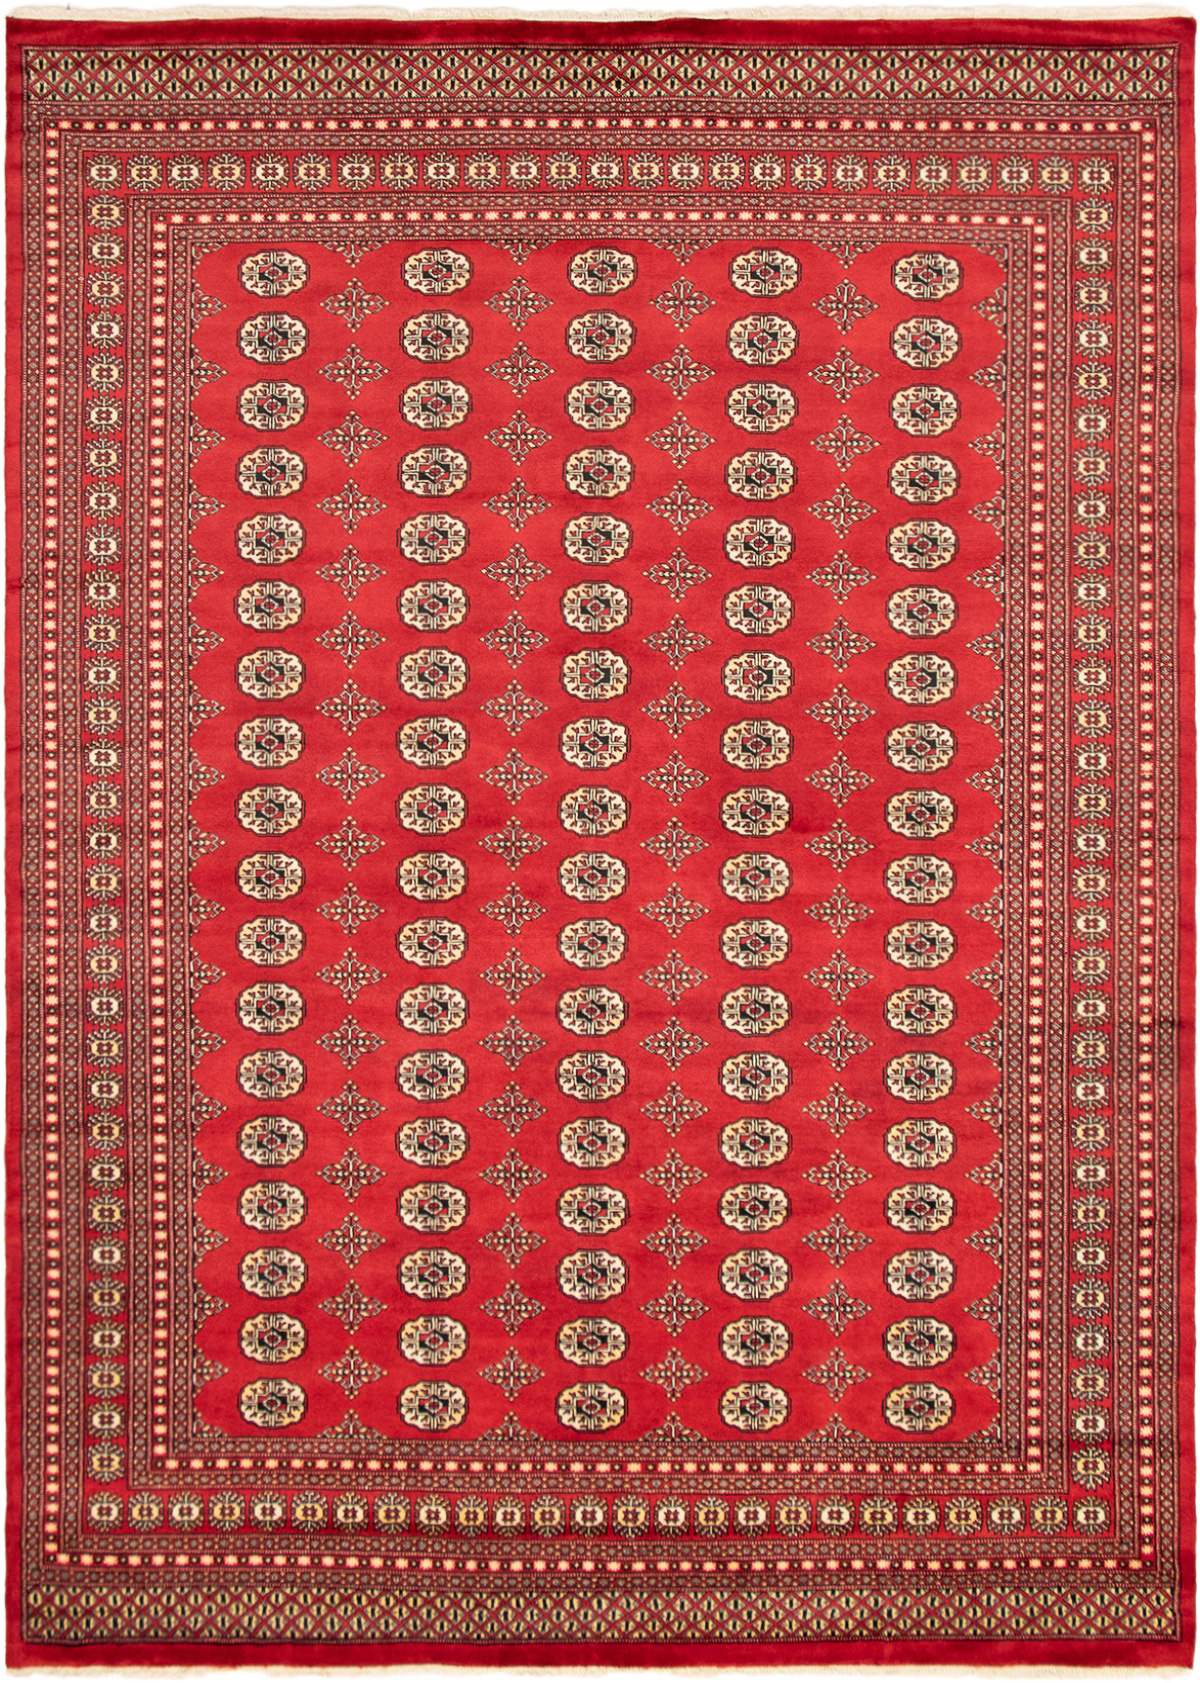 Hand-knotted Finest Peshawar Bokhara Red Wool Rug 8'2" x 9'3" Size: 8'2" x 9'3"  